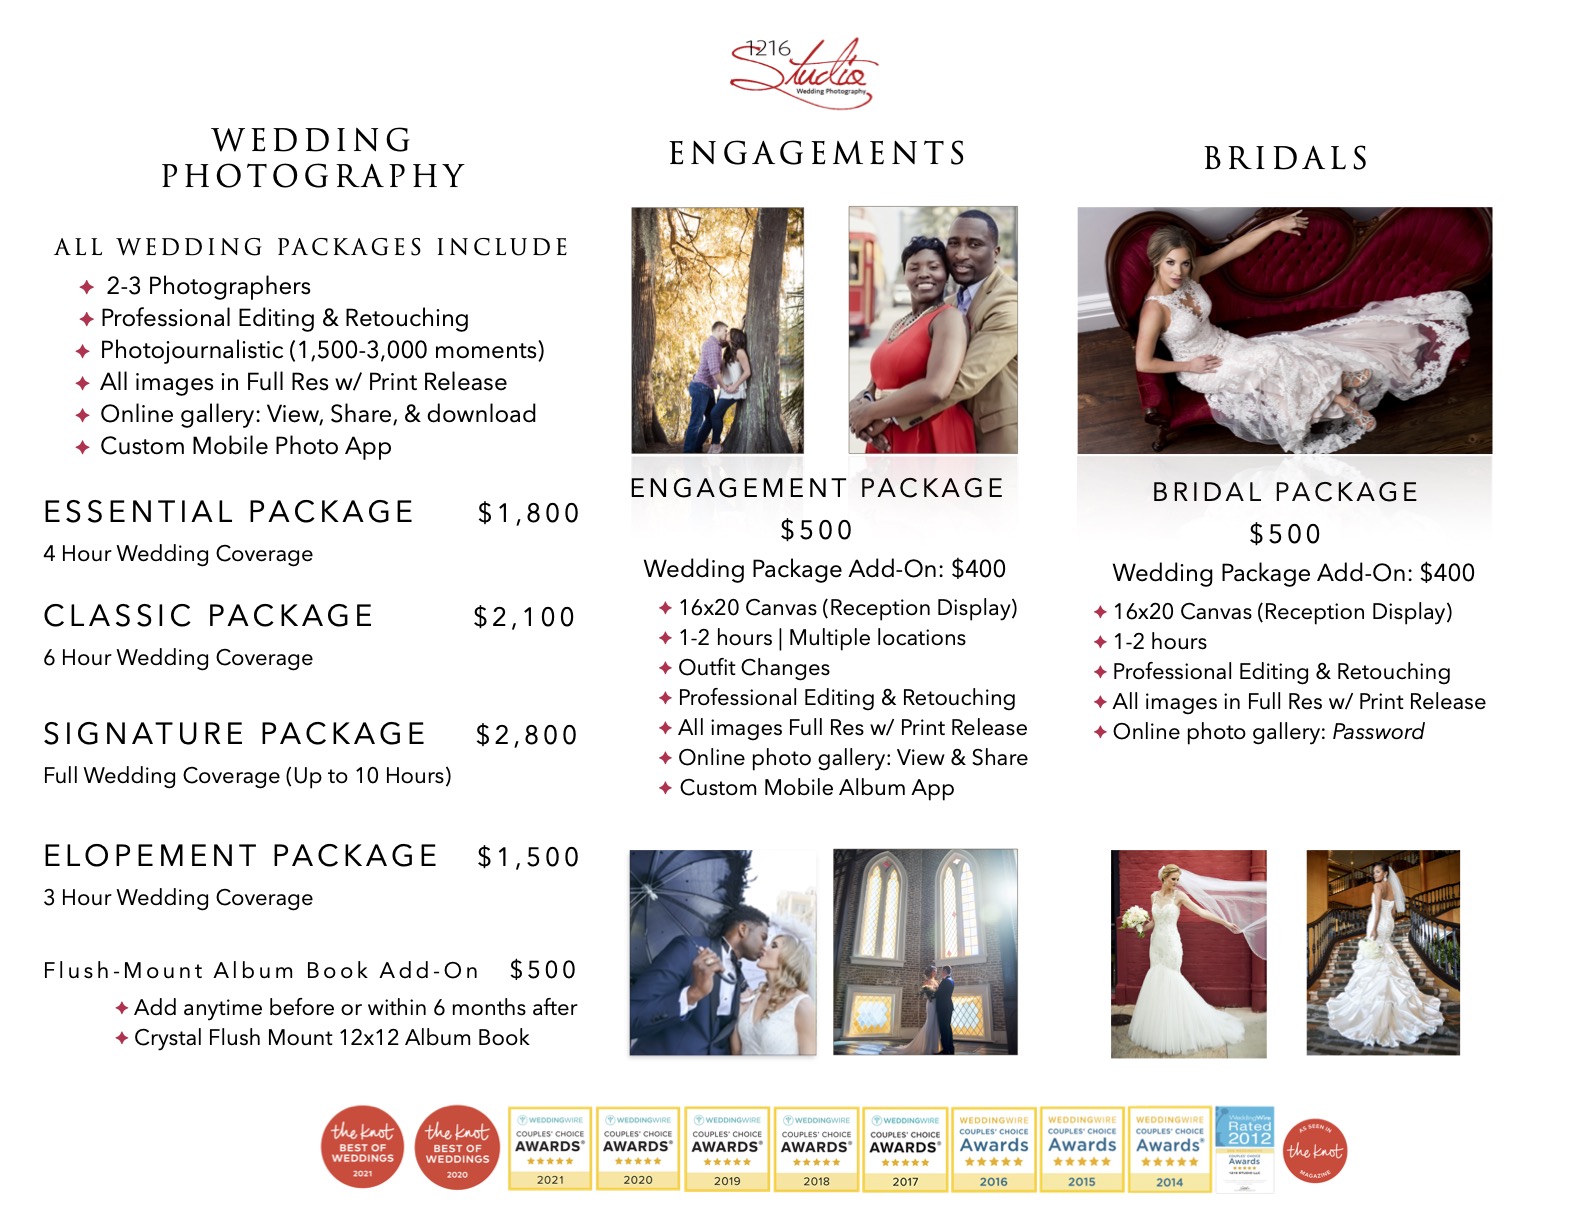 New Orleans Wedding Package Pricing Add On Prices 1216 Studio